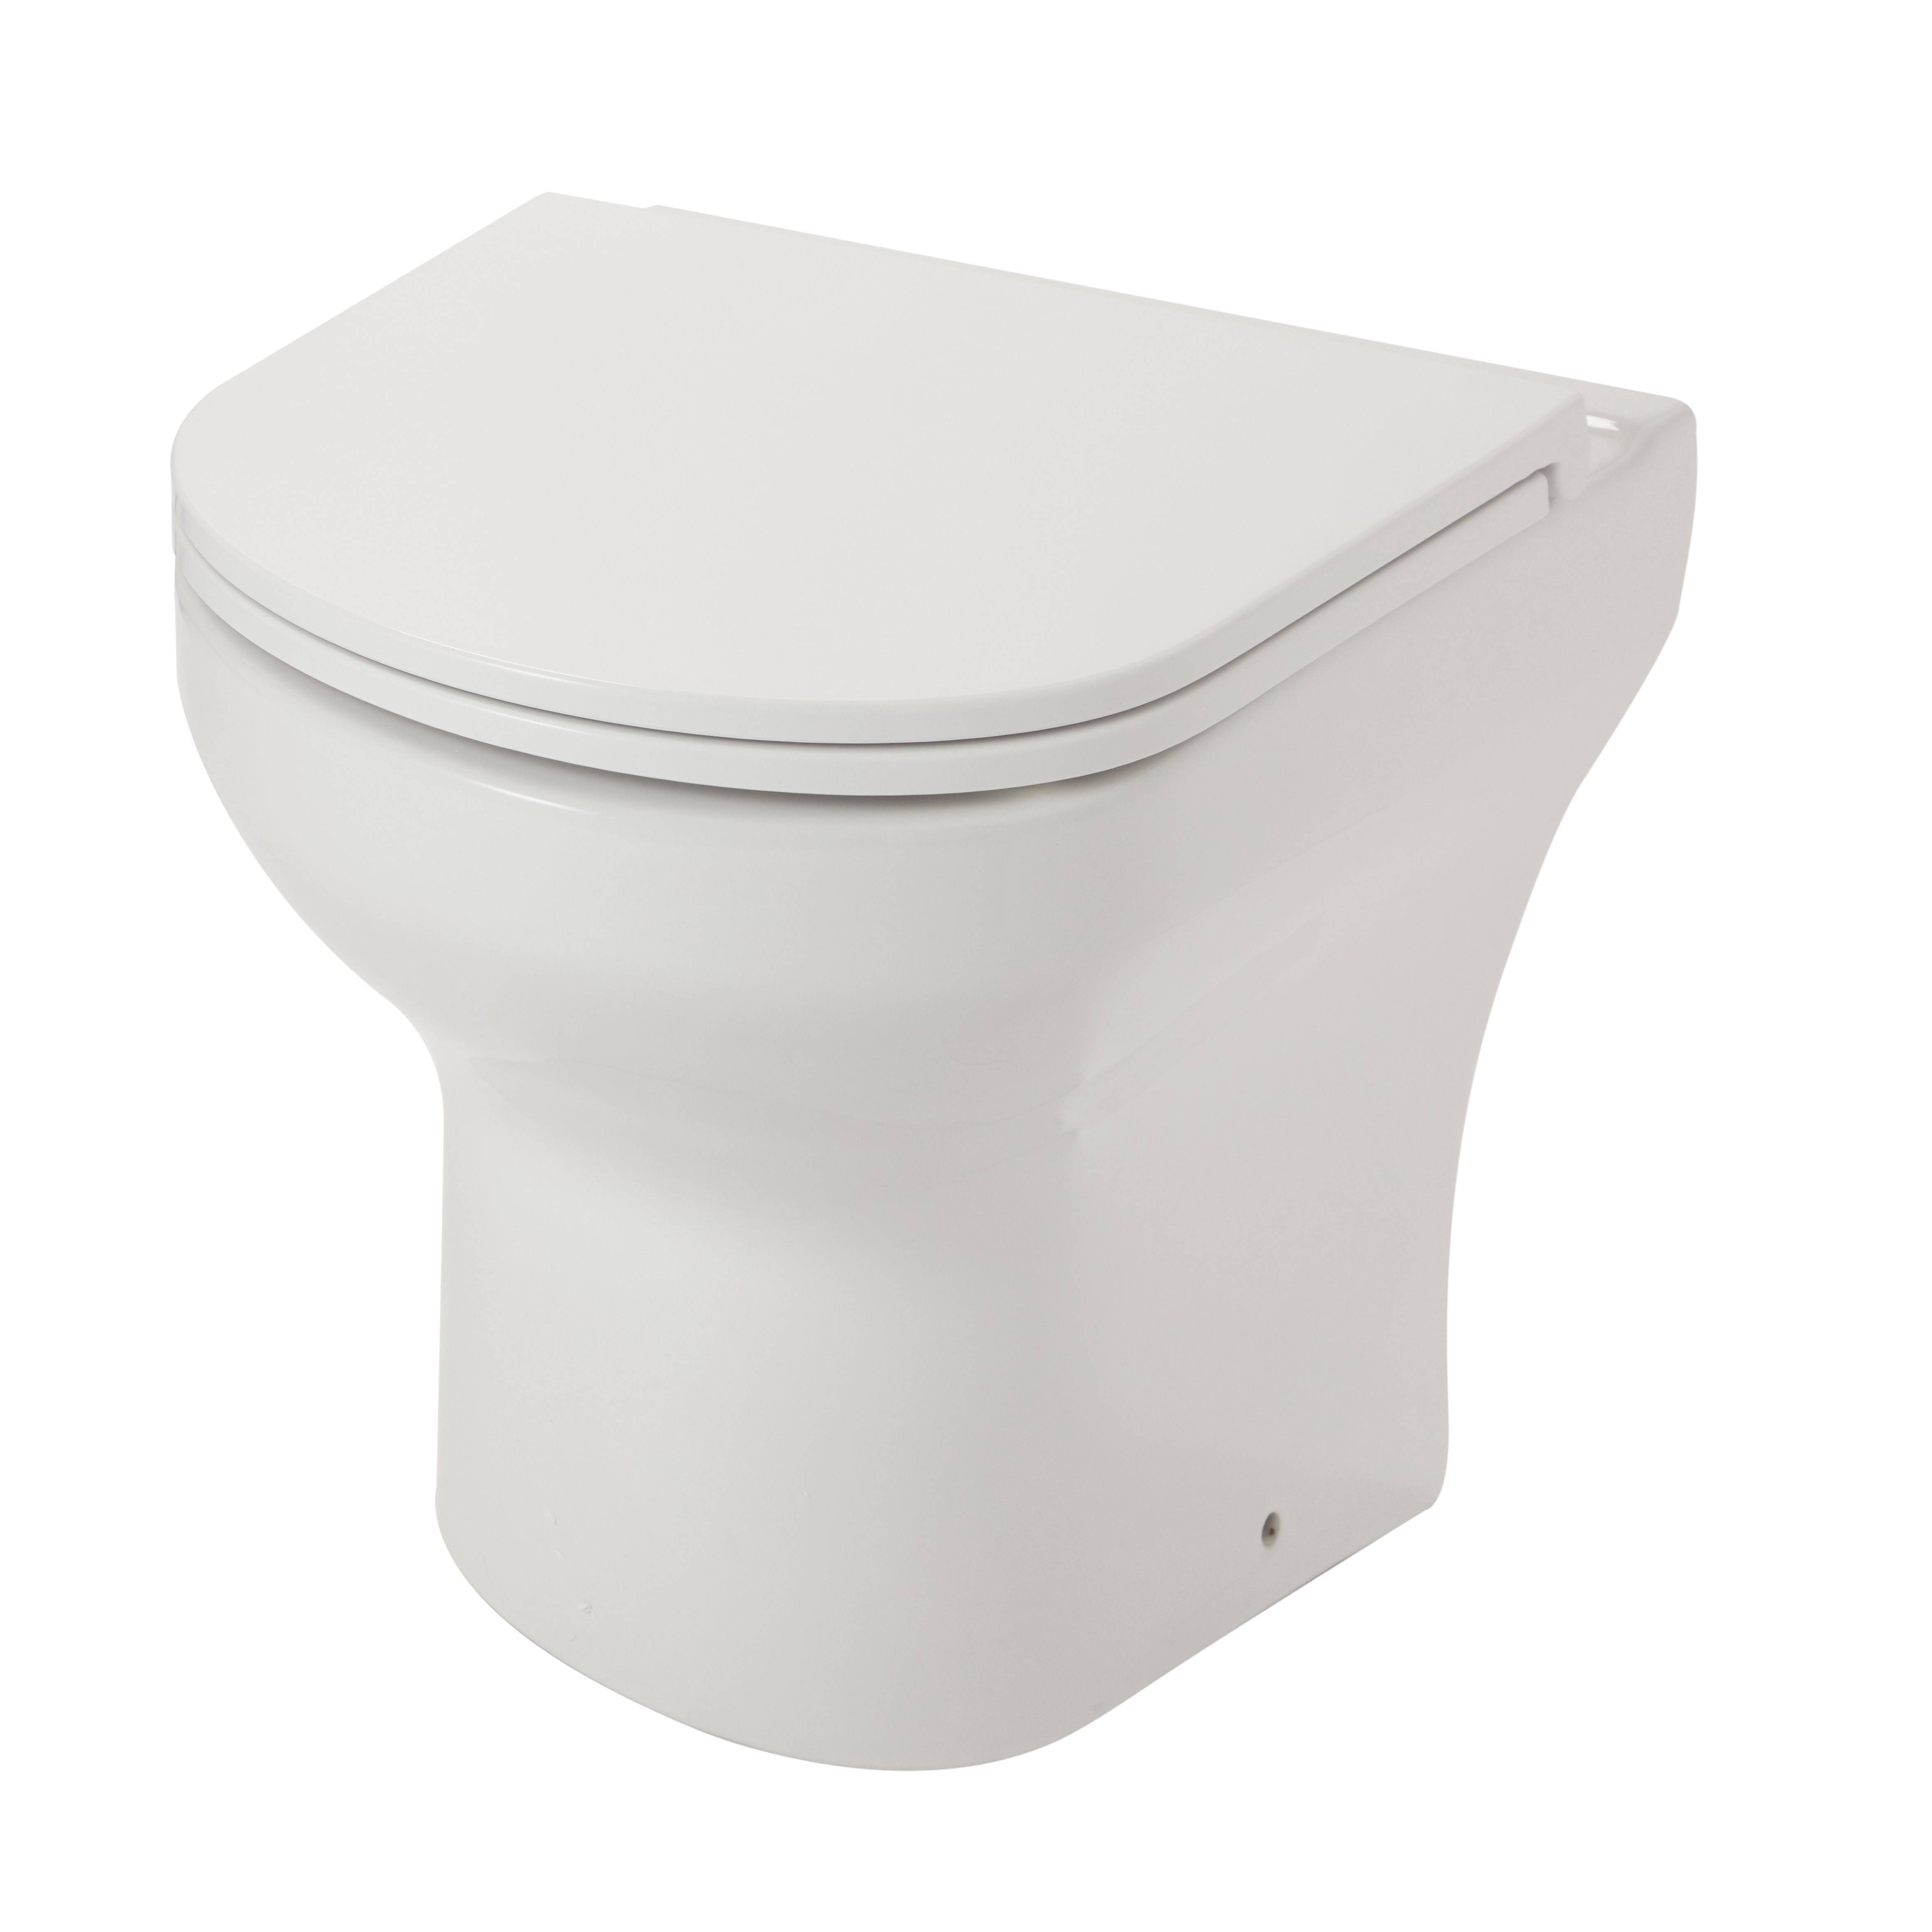 GoodHome Cavally White Back to wall Floor-mounted Toilet & full pedestal basin (W)360mm (H)407mm